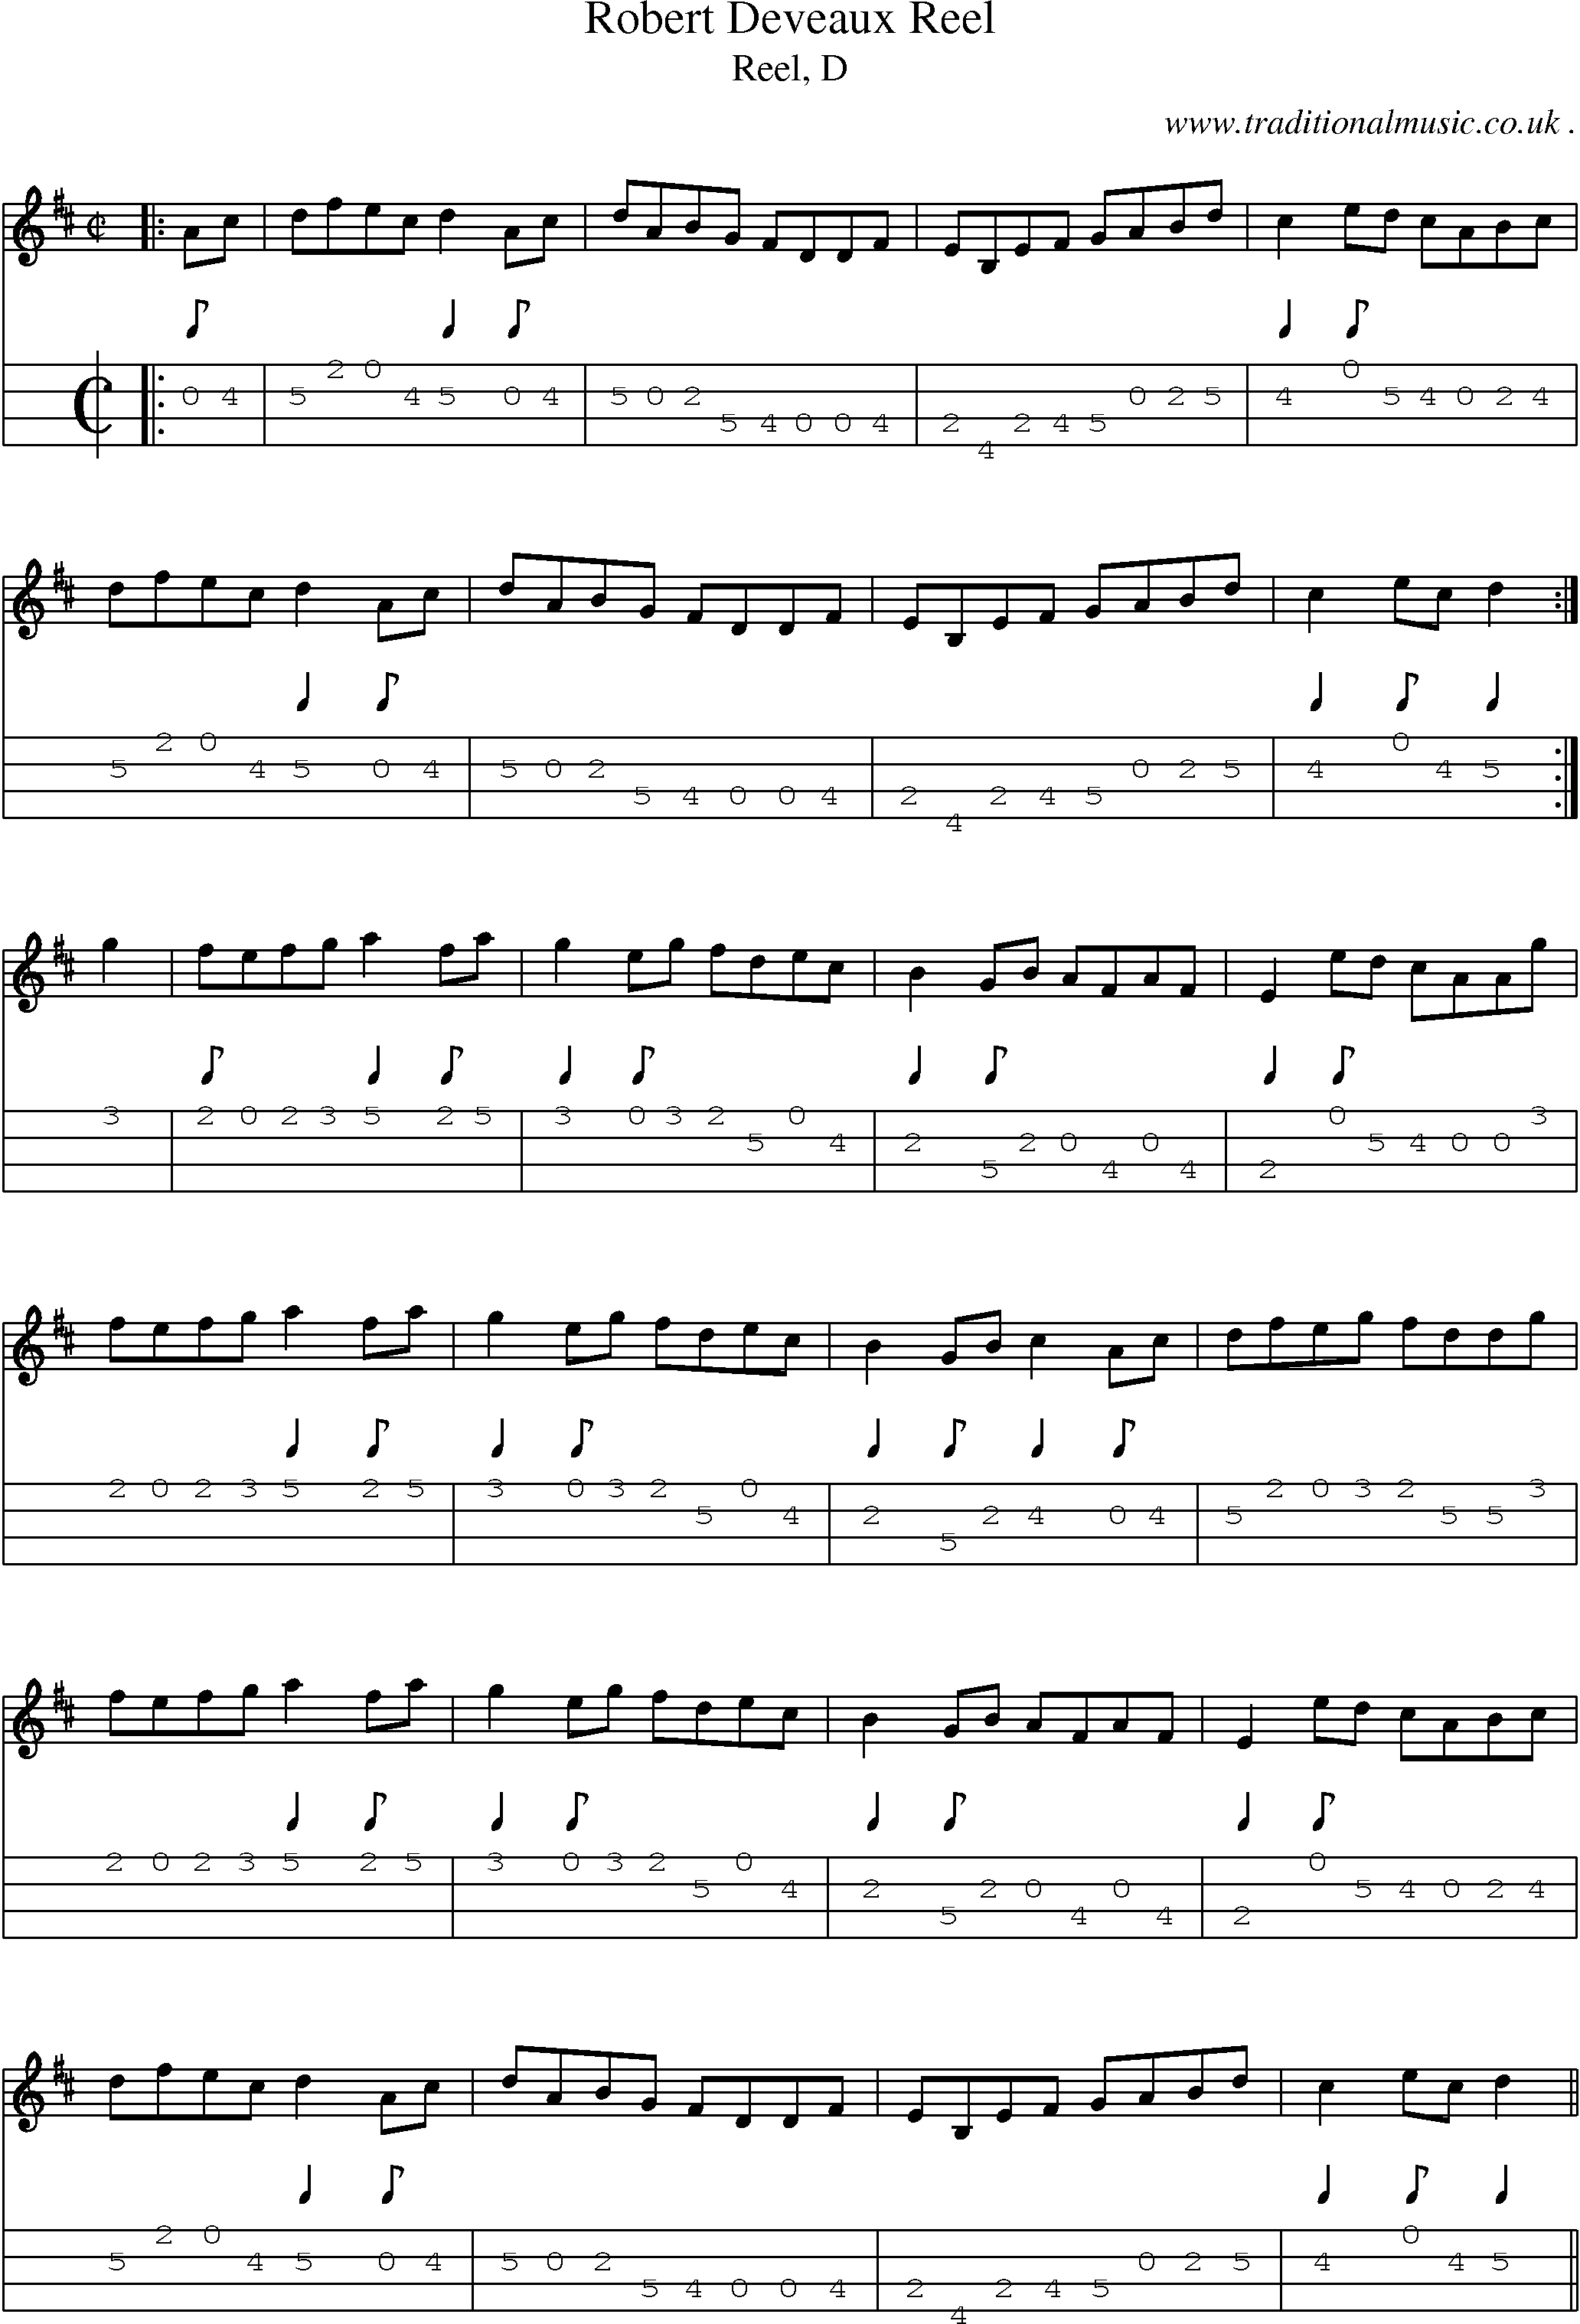 Sheet-music  score, Chords and Mandolin Tabs for Robert Deveaux Reel